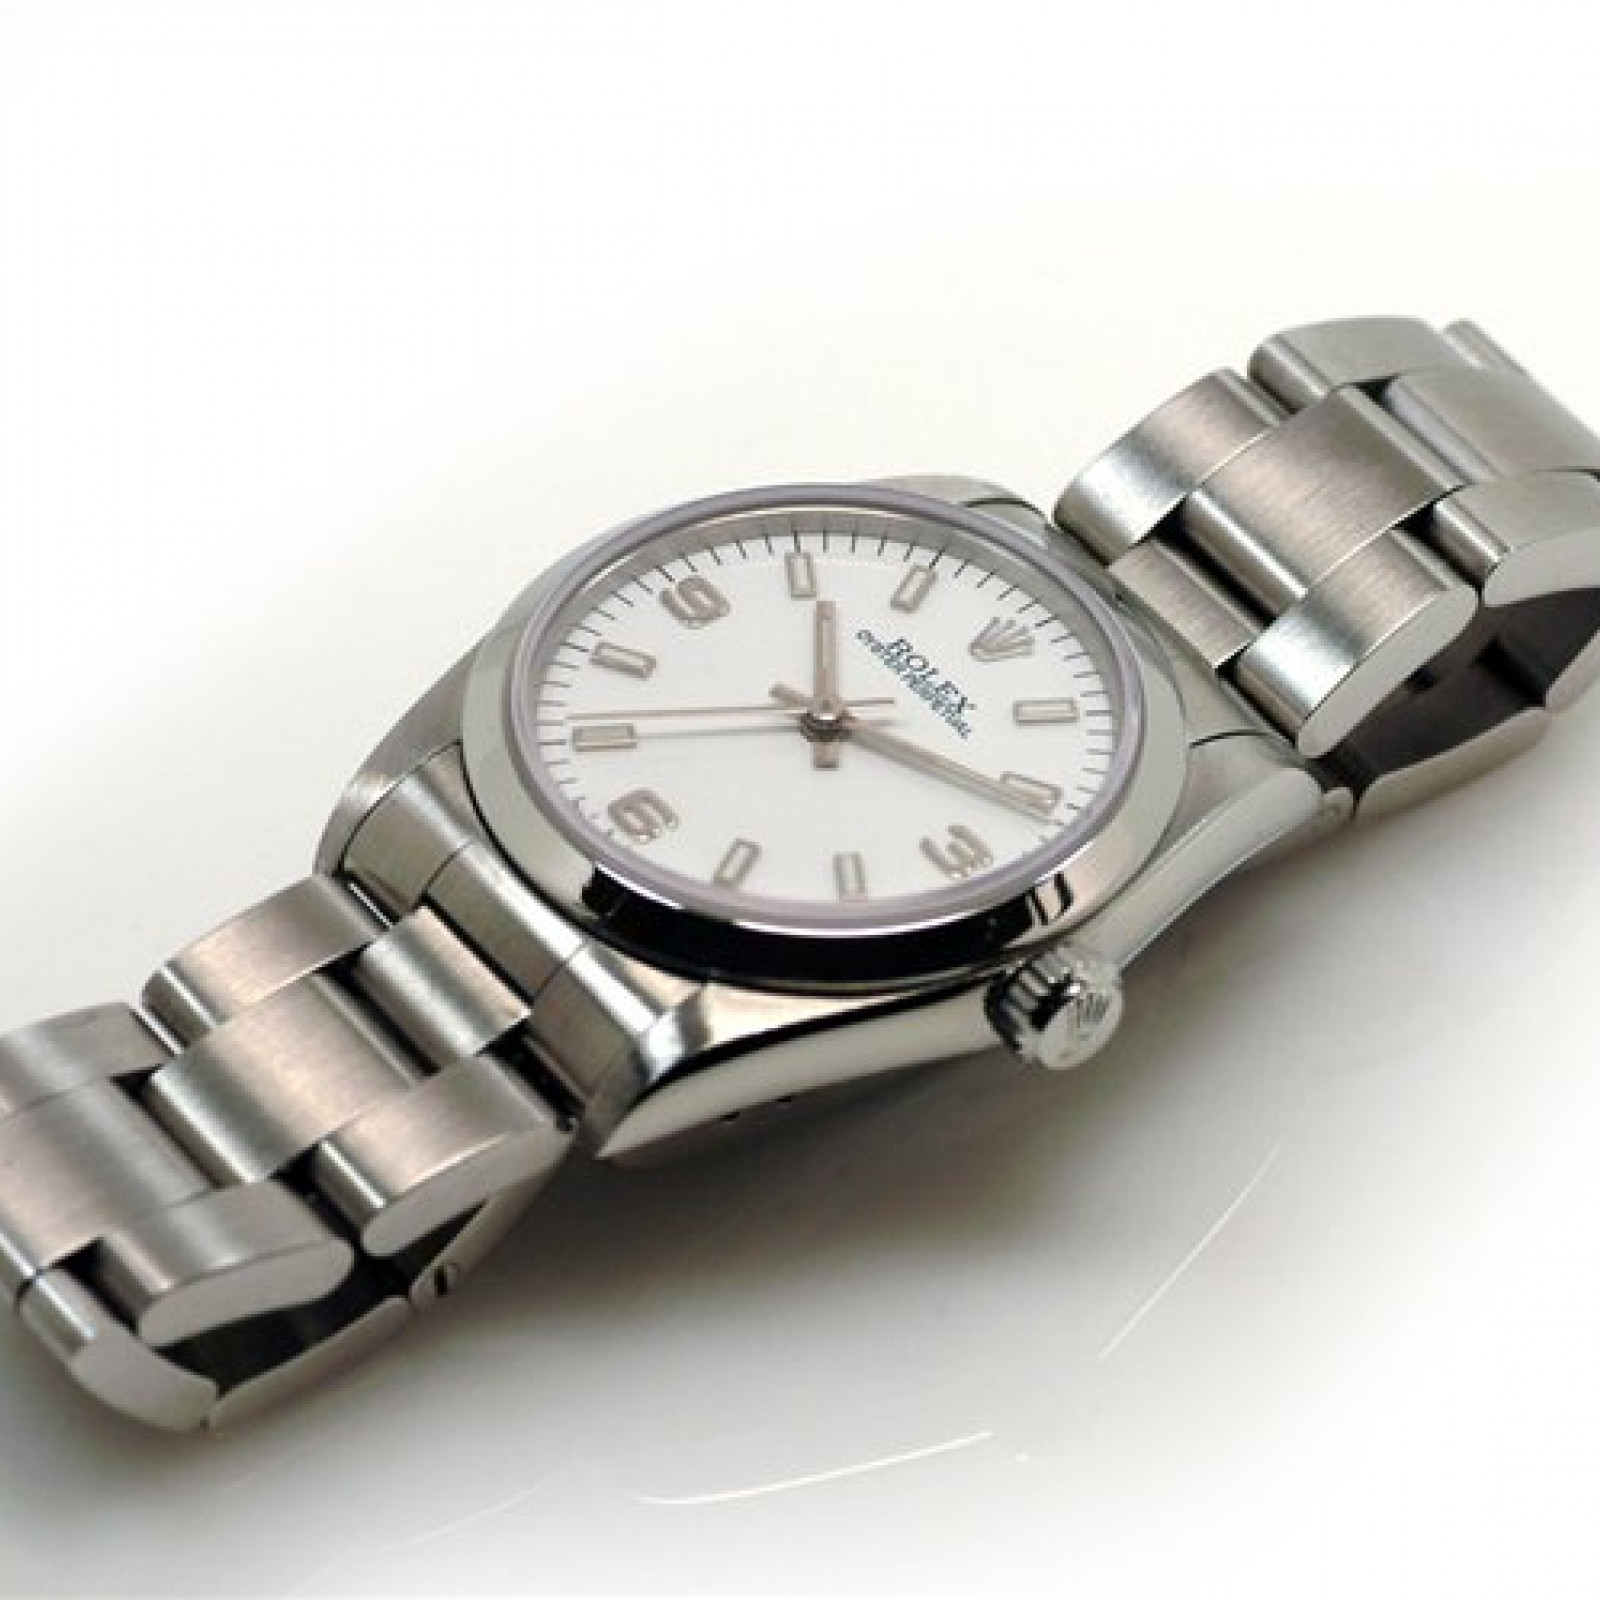 Rolex Oyster Perpetual 67480 Steel